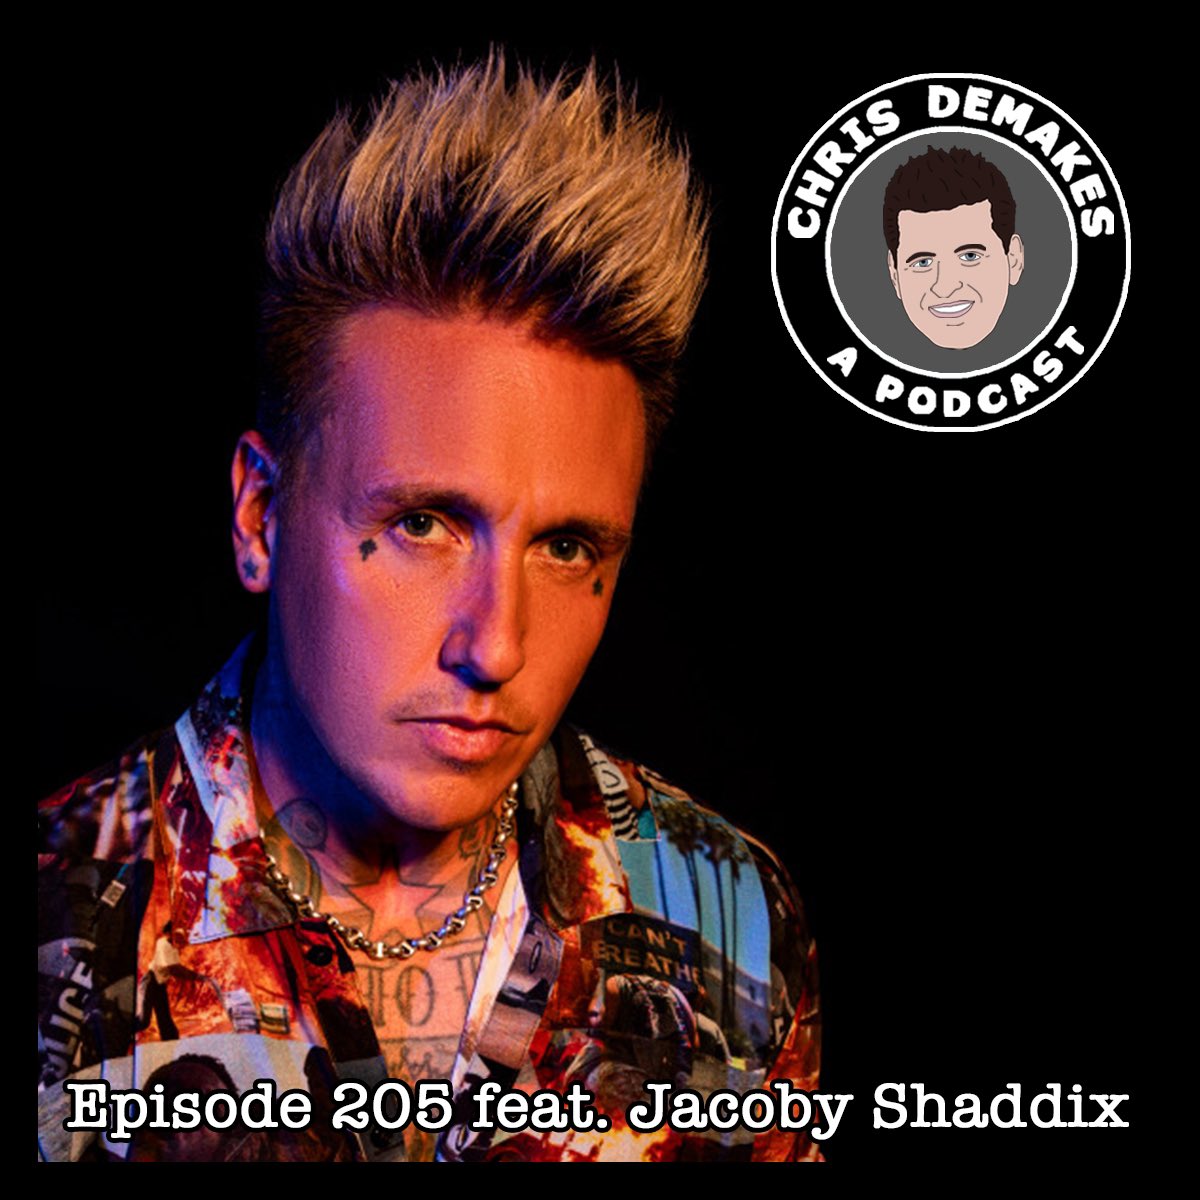 NEW EPISODE OUT NOW! @JacobyShaddix and I break down the writing, recording, and inspiration behind @paparoach hit 2000 single, “Last Resort”!

Check it out wherever you listen to podcasts!